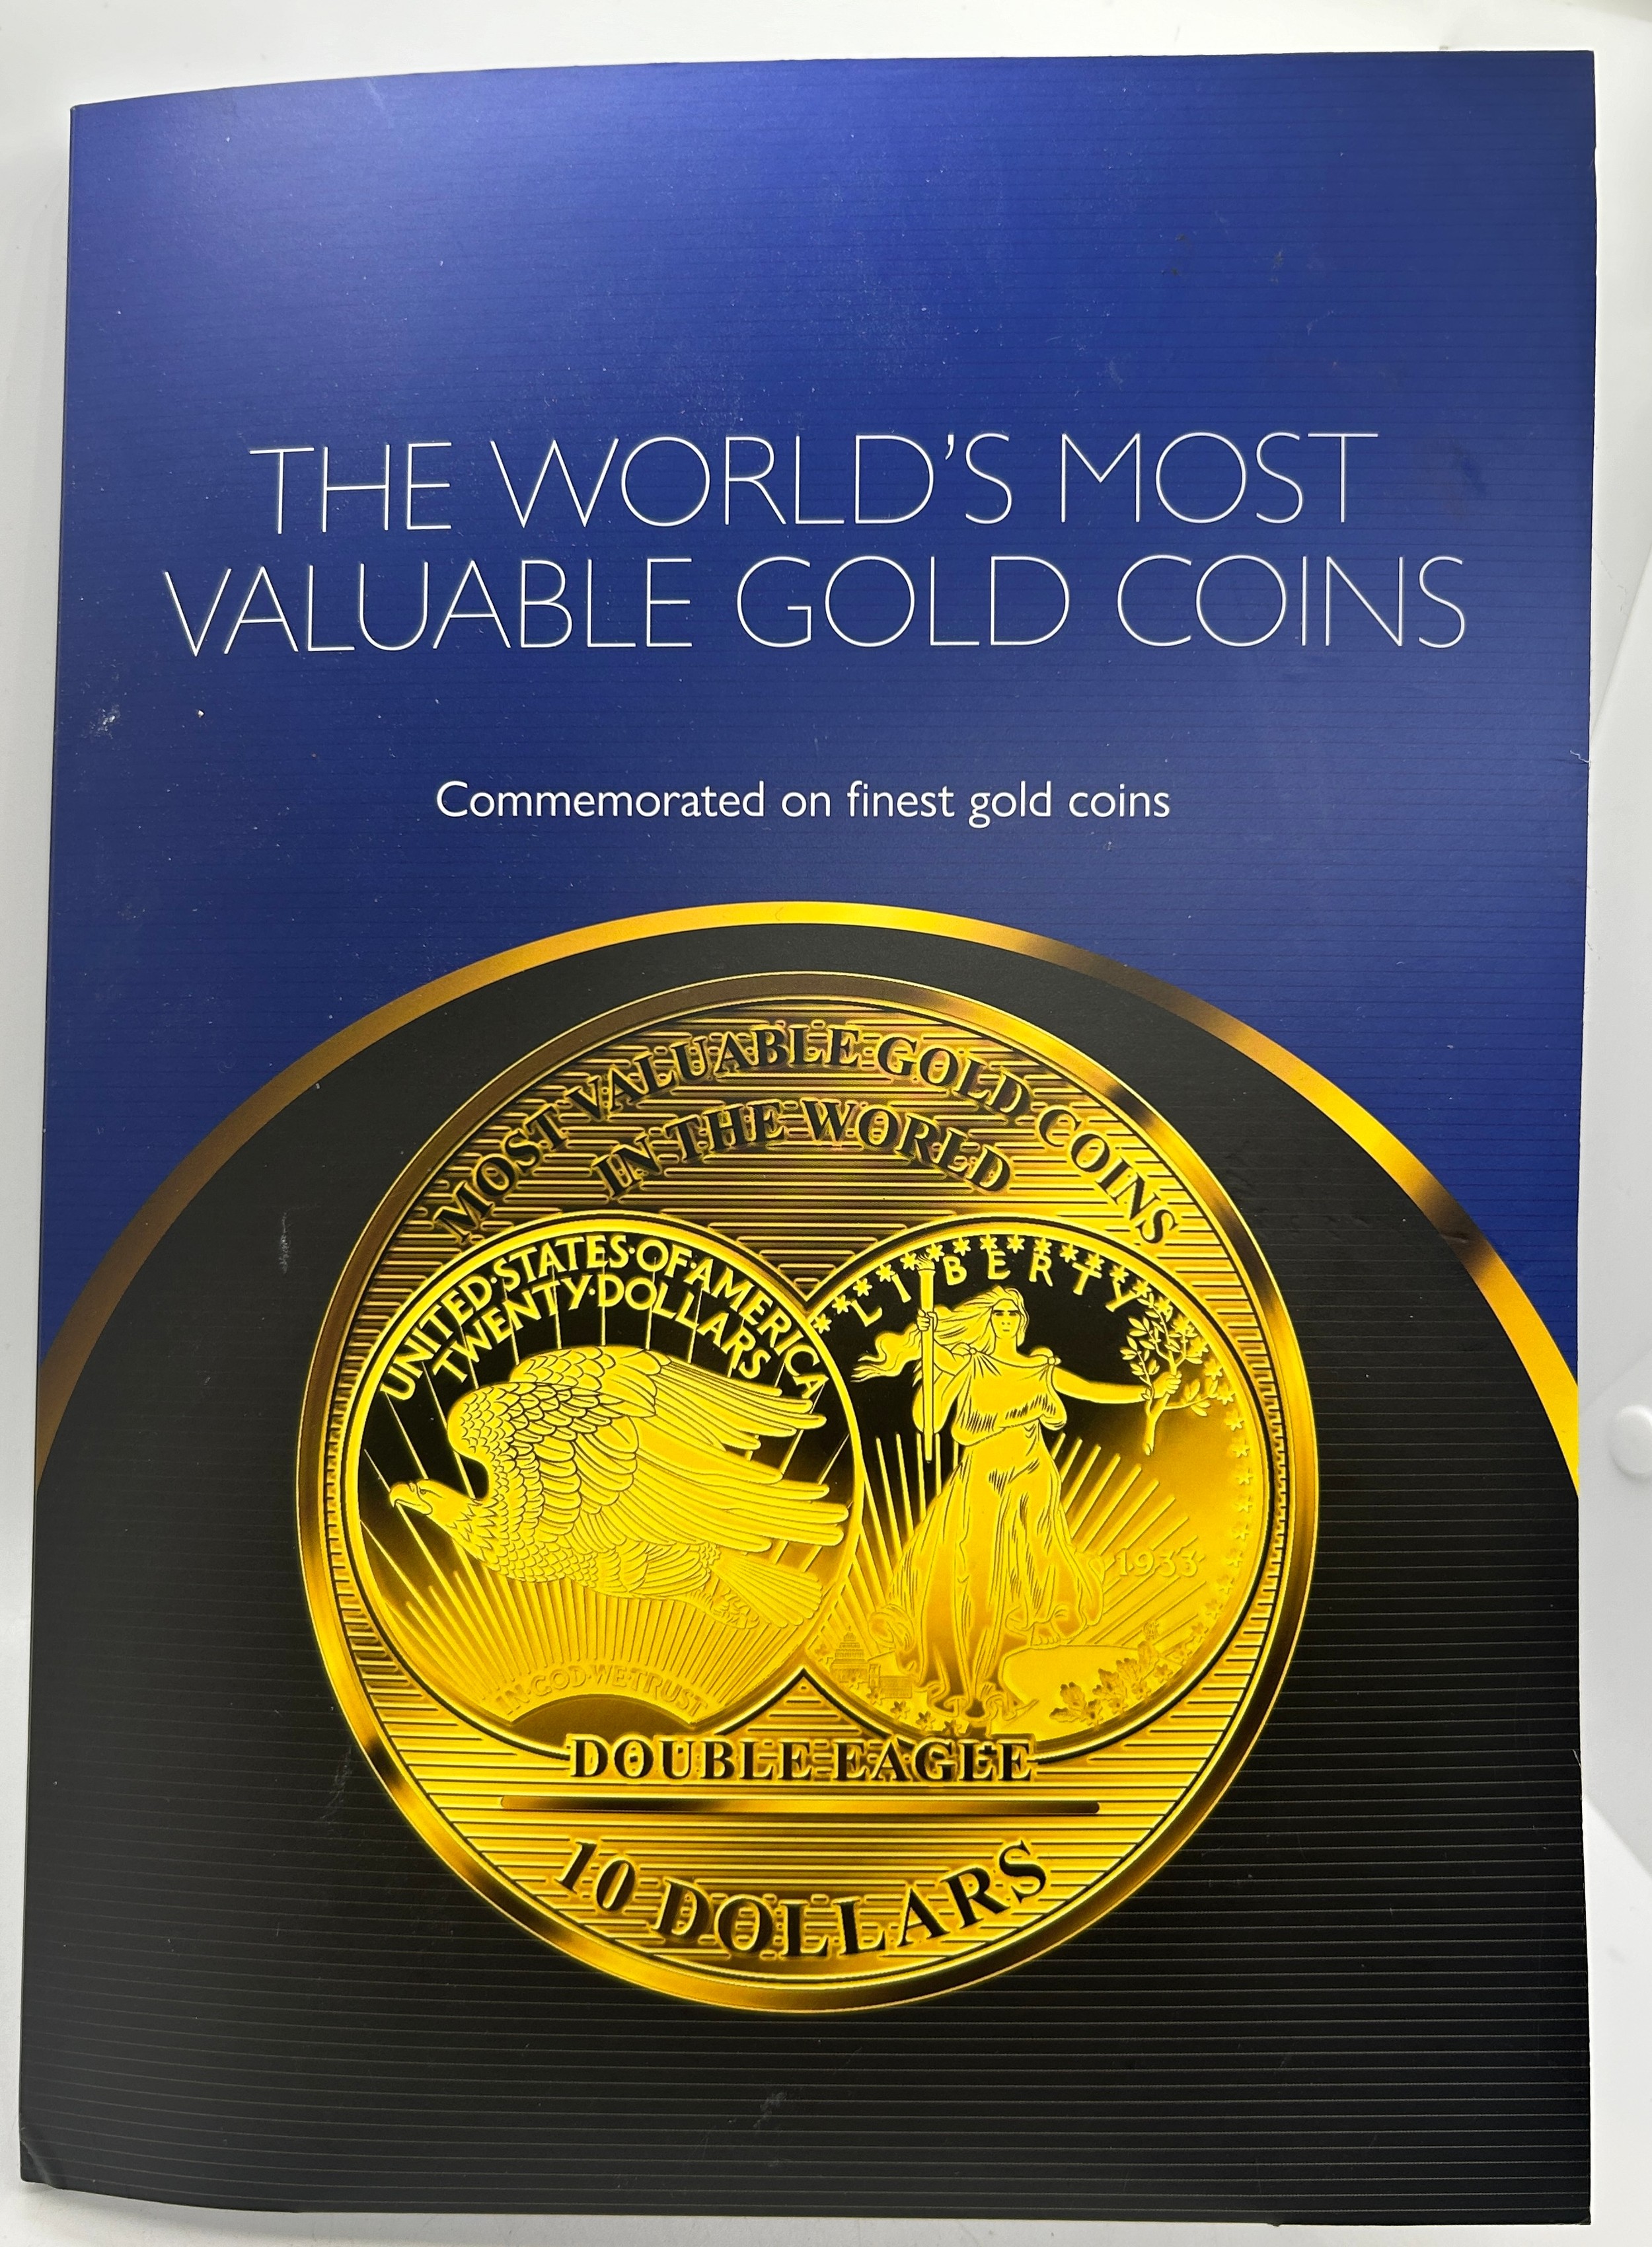 3 Solomon Islands, gold plated $10 coins by the worlds most valuable gold coins, to include USA